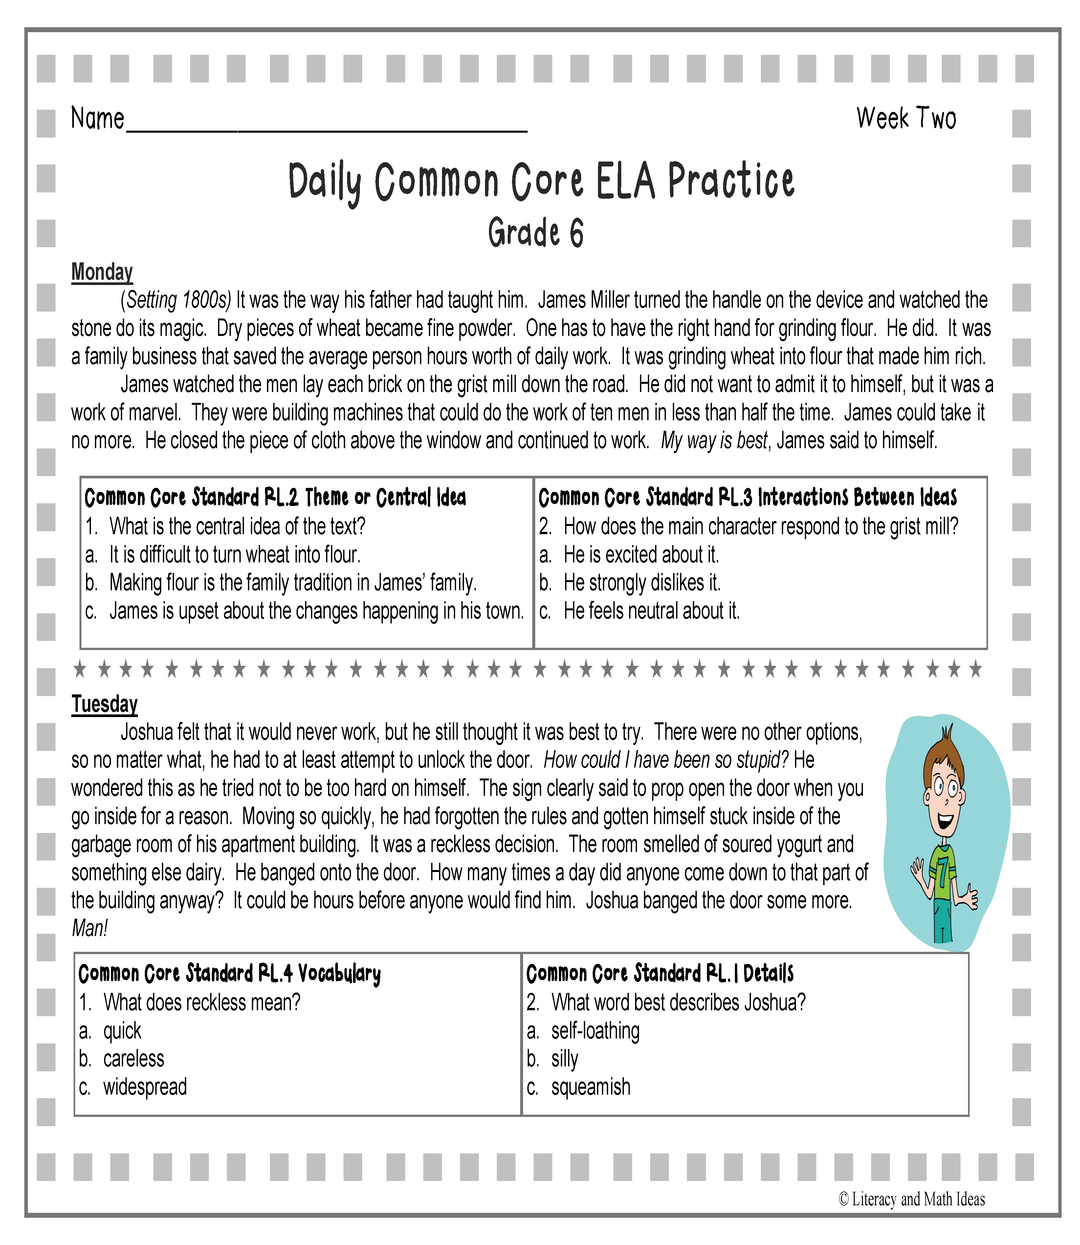 Grade 6 Daily Common Core Reading Practice Weeks 1-5